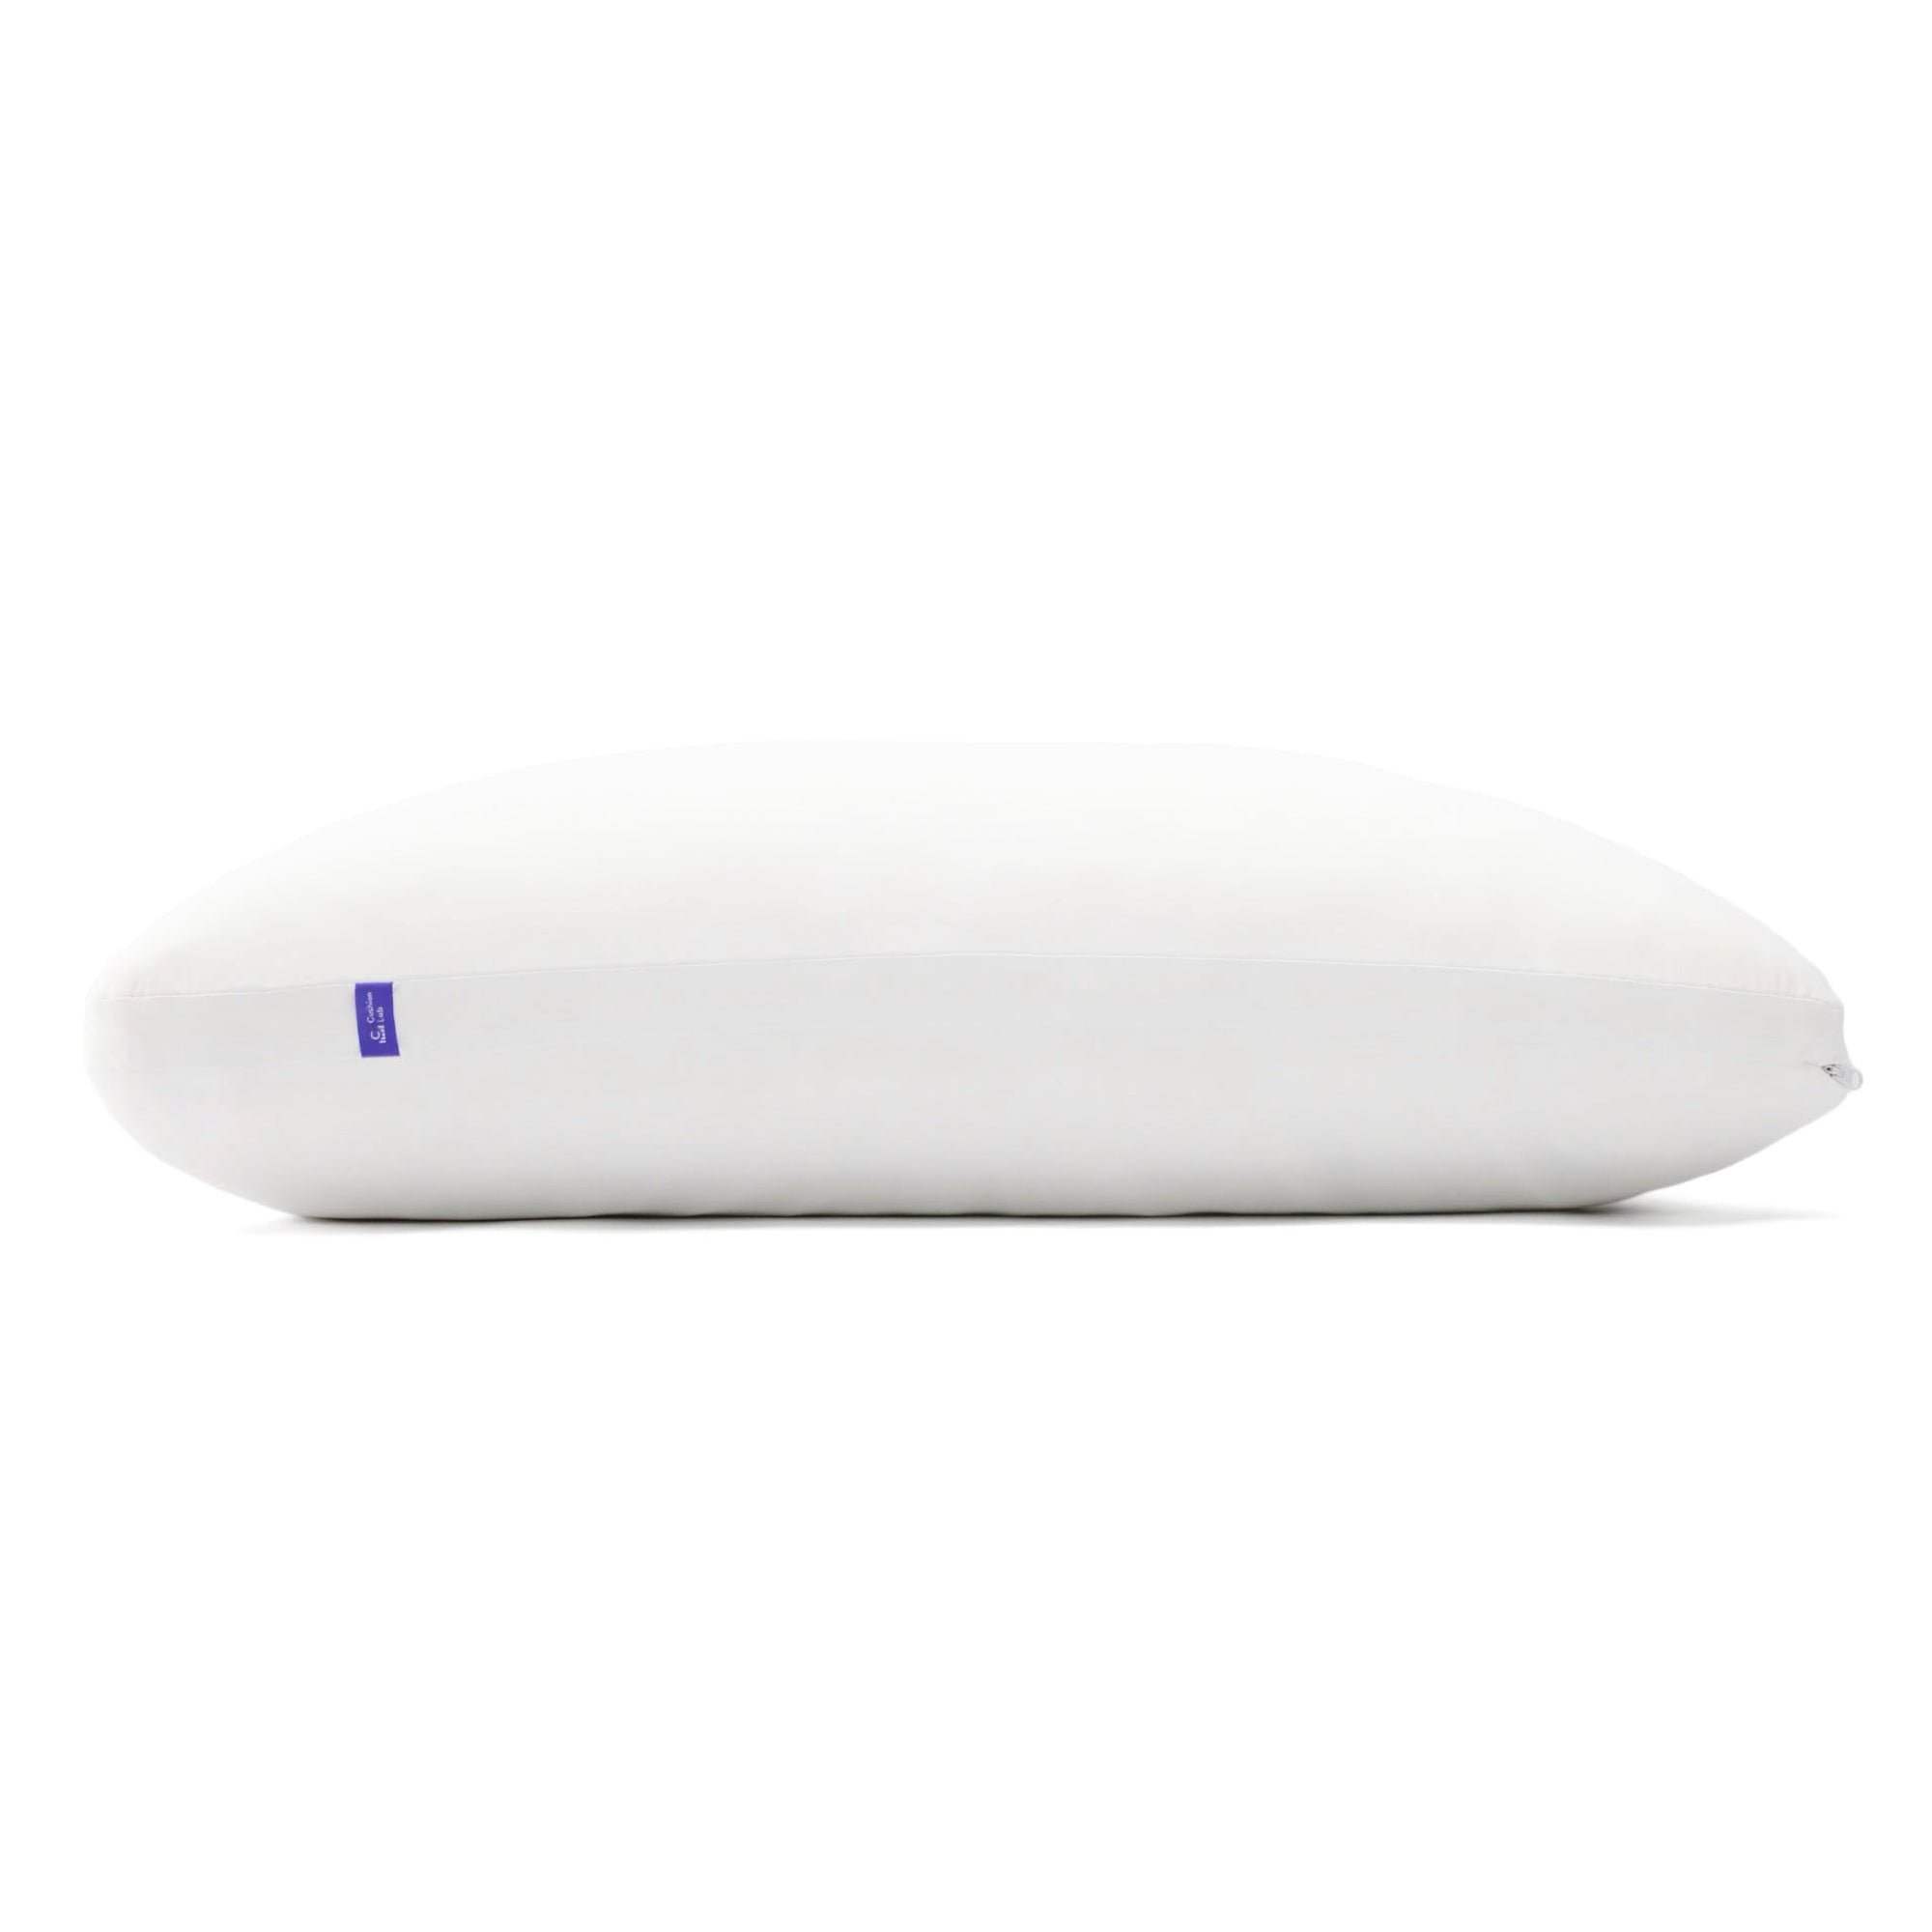 Cushion Lab pillows review - The Gadgeteer